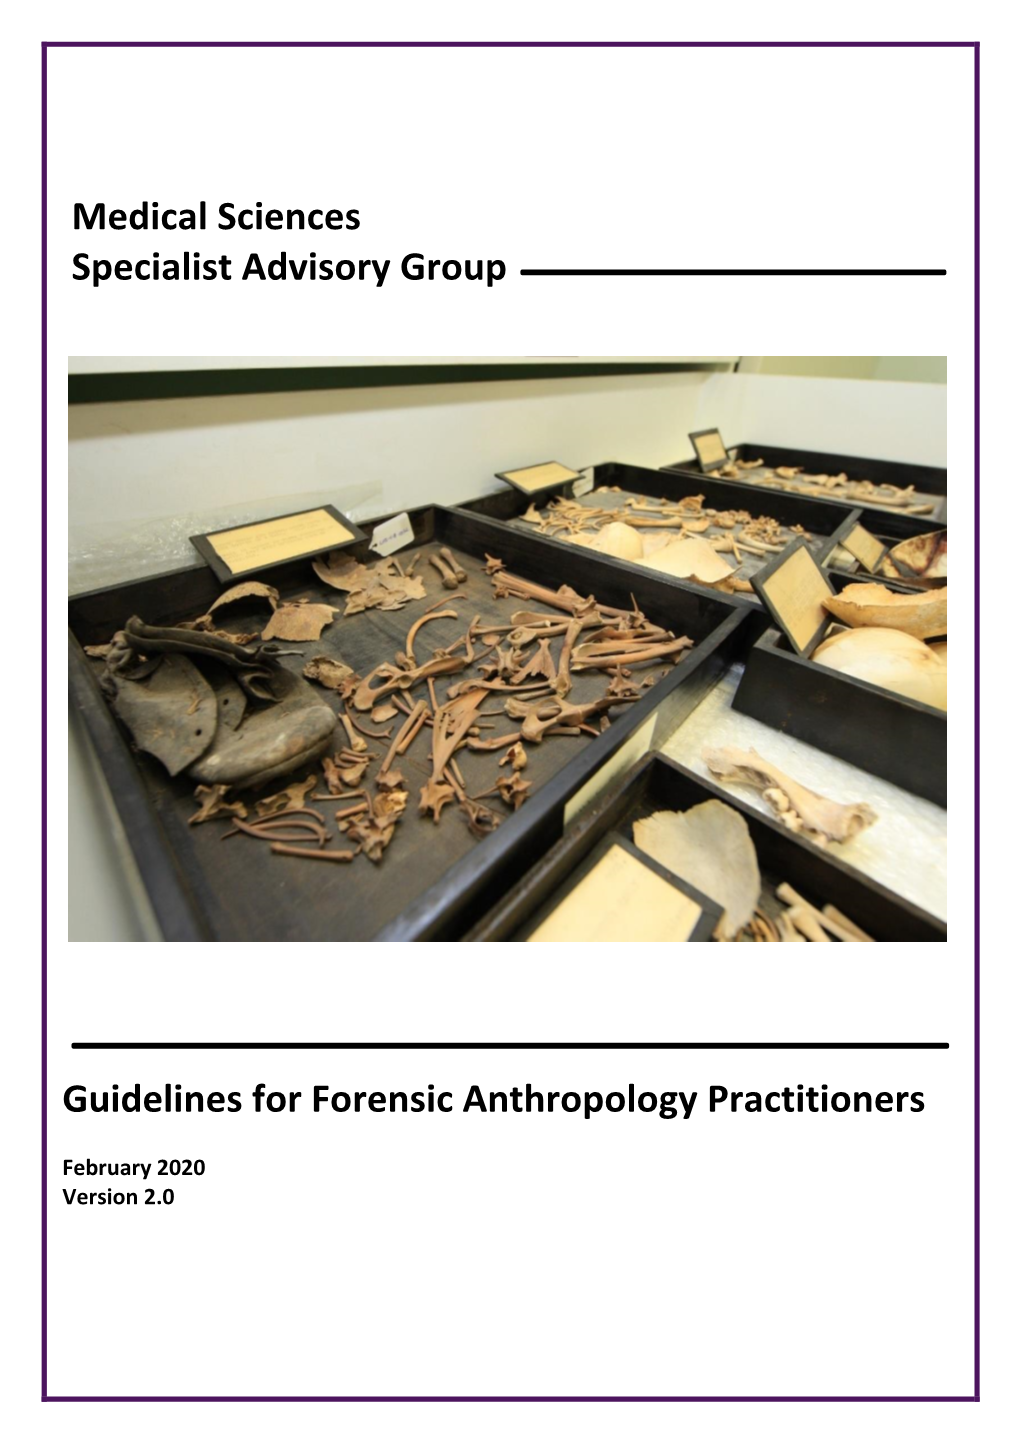 Guidelines for Forensic Anthropology Practitioners